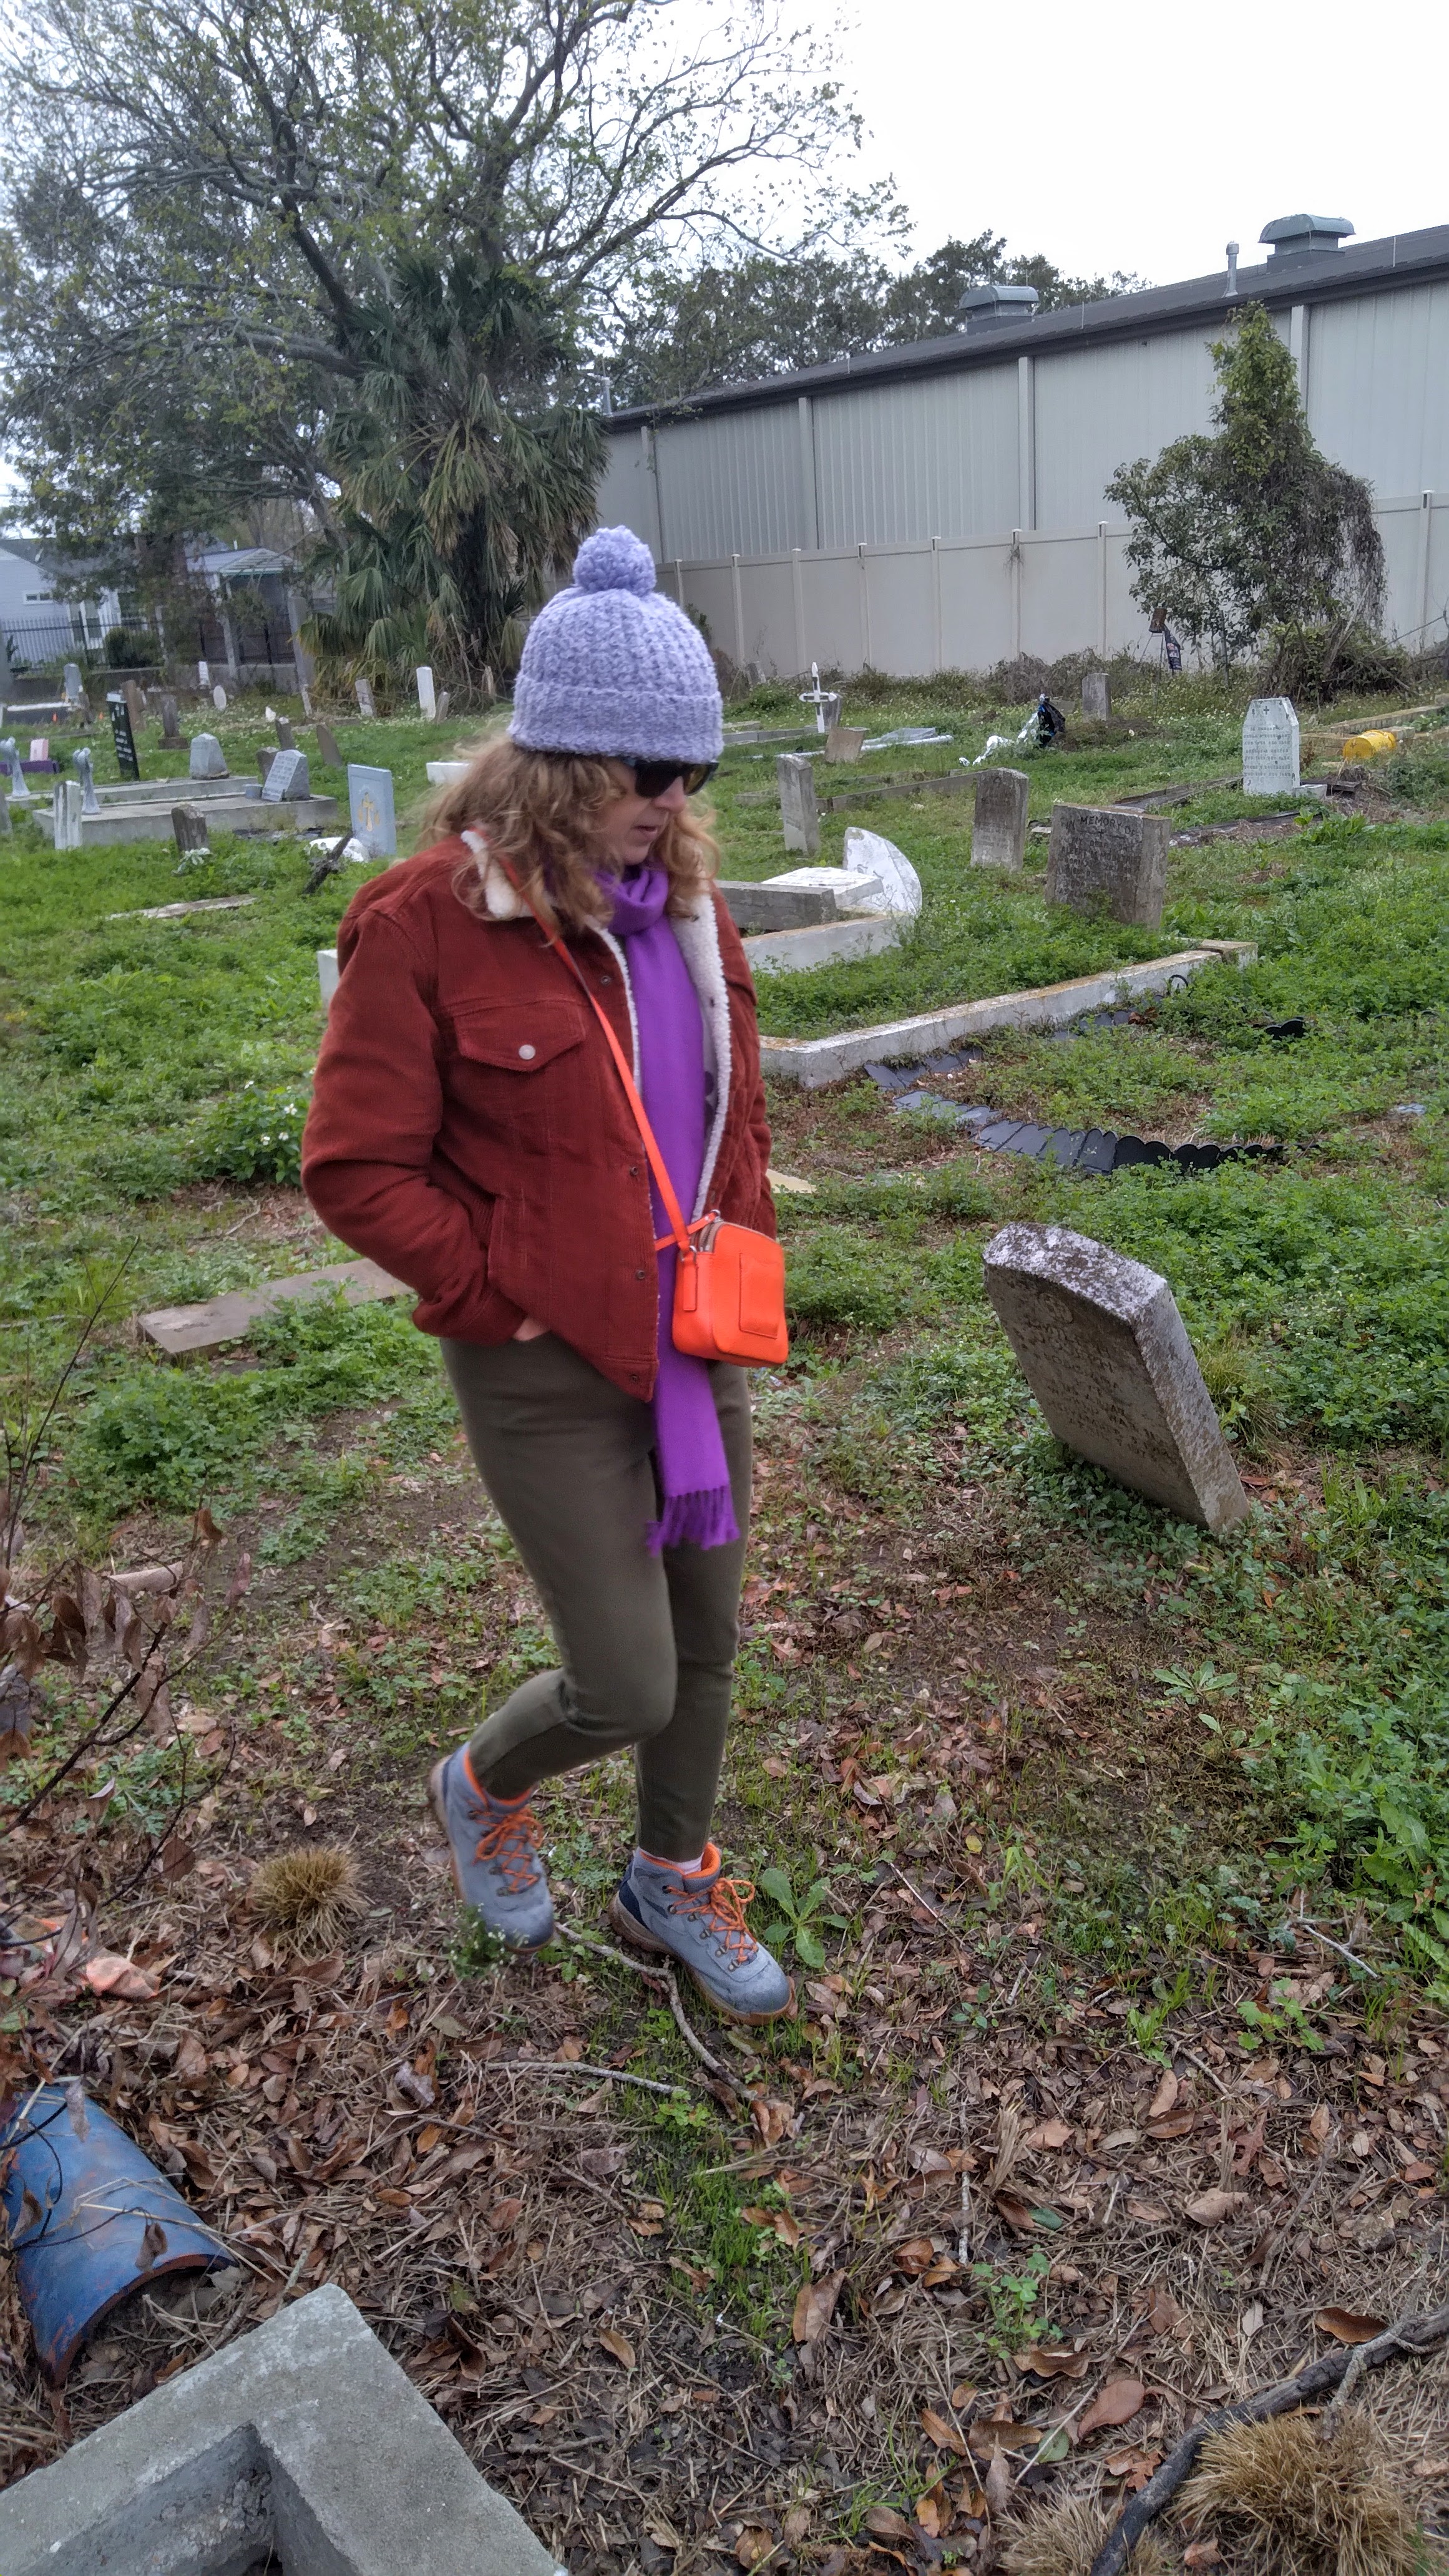 Gina Phillips at Holt Cemetery in New Orleans